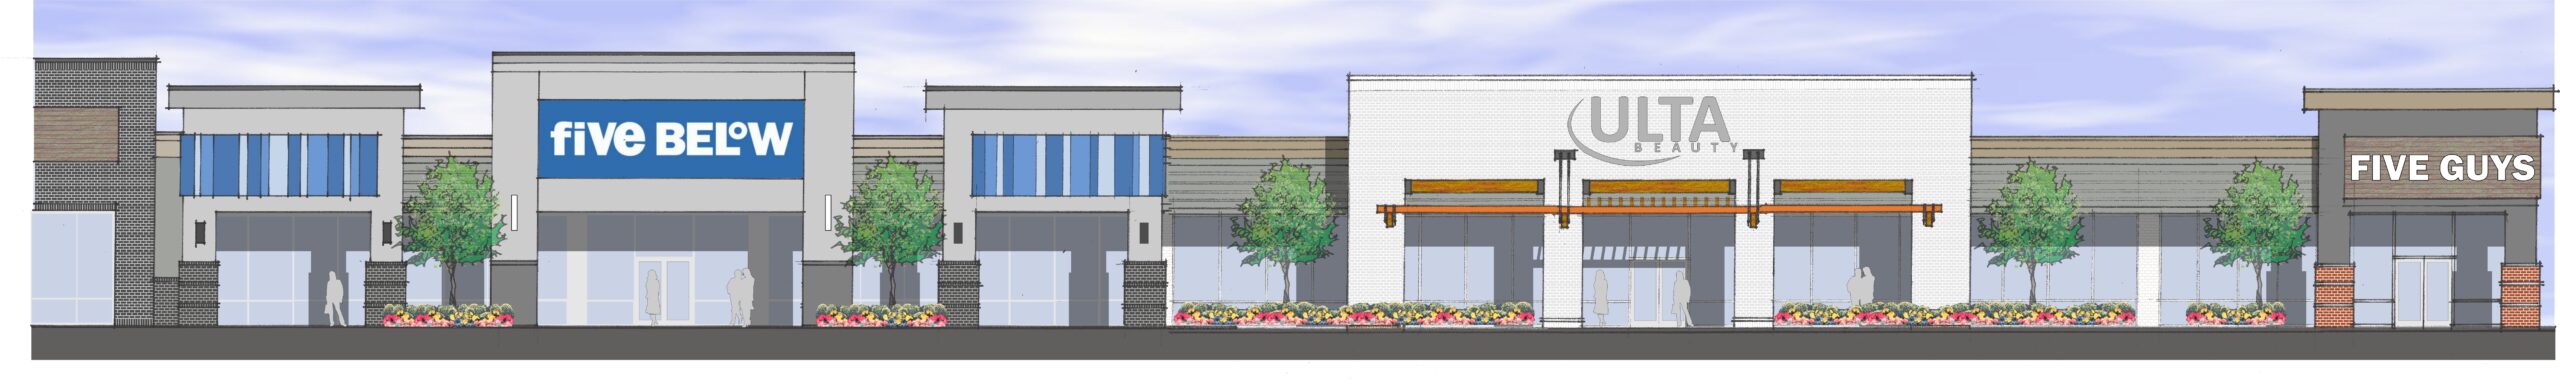 five below willow lawn rendering scaled